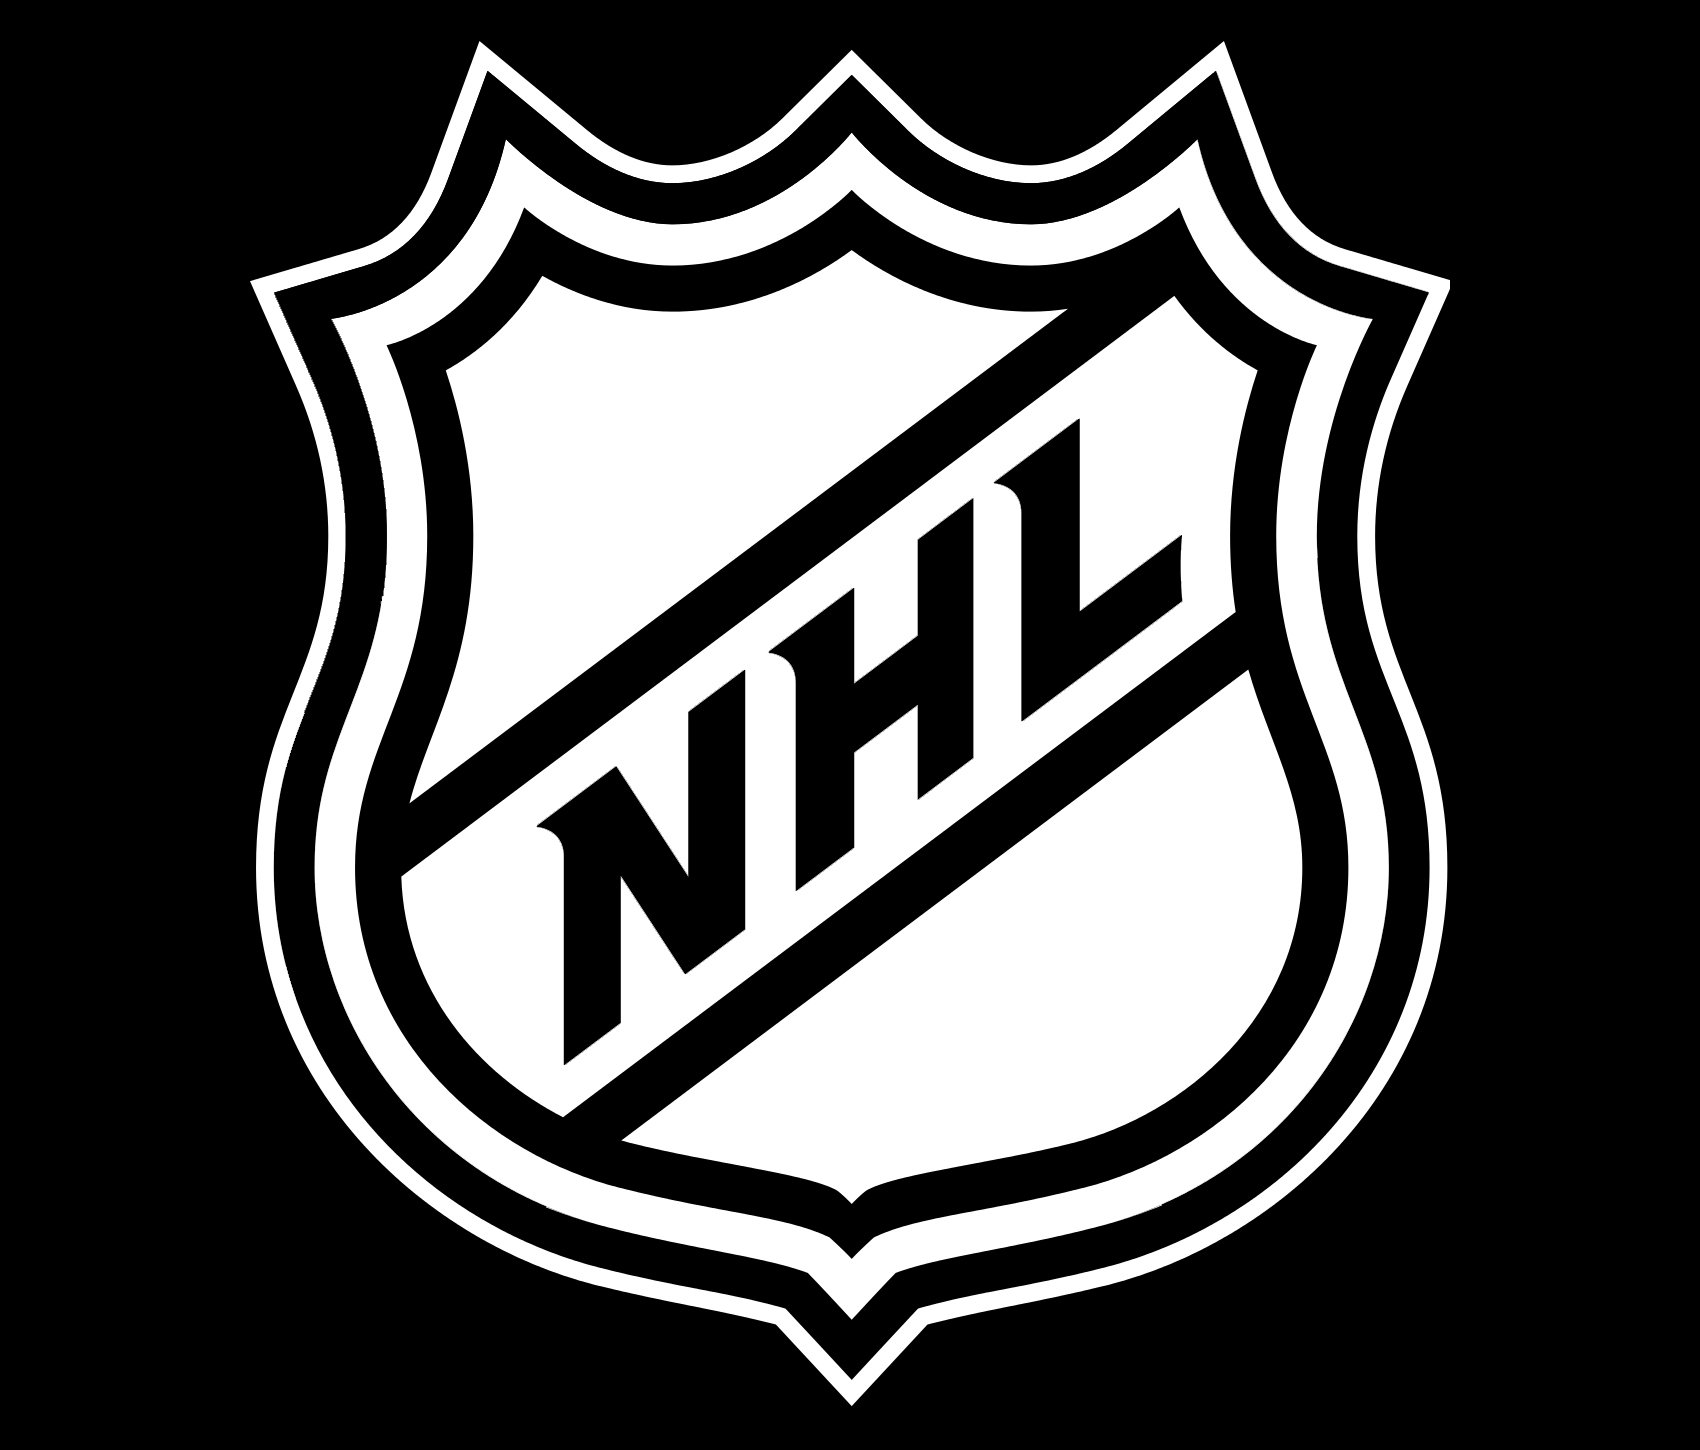 NHL Logo, National Hockey League Symbol, Meaning, History and Evolution